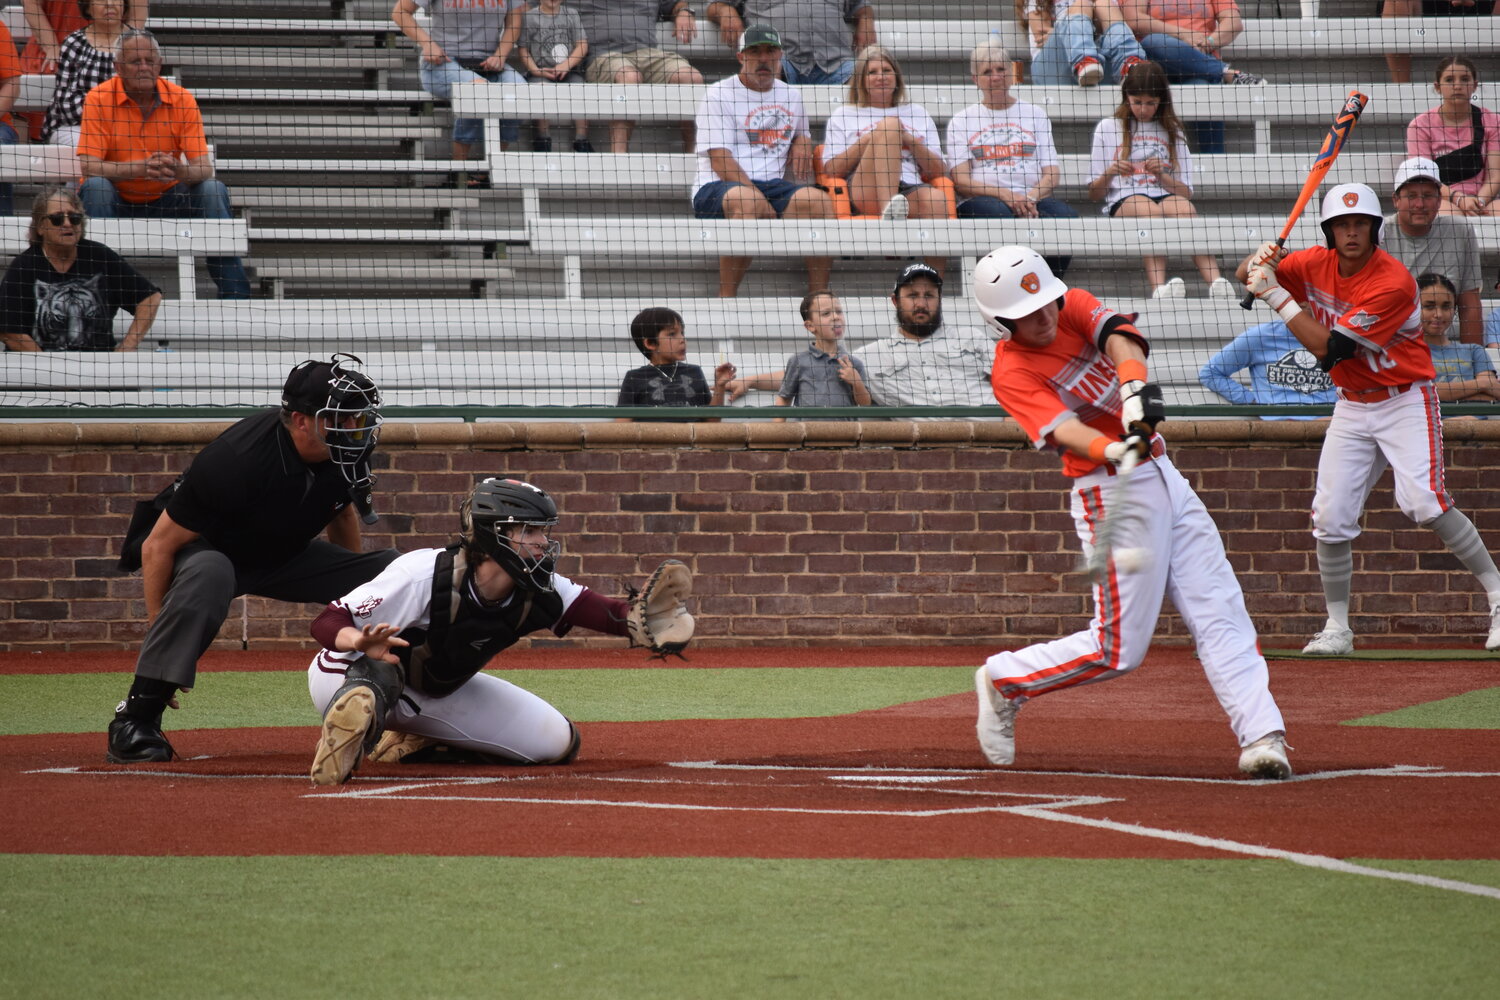 Cason Davis connects for a two-strike hit to open Thursday’s playoff game against White Oak.